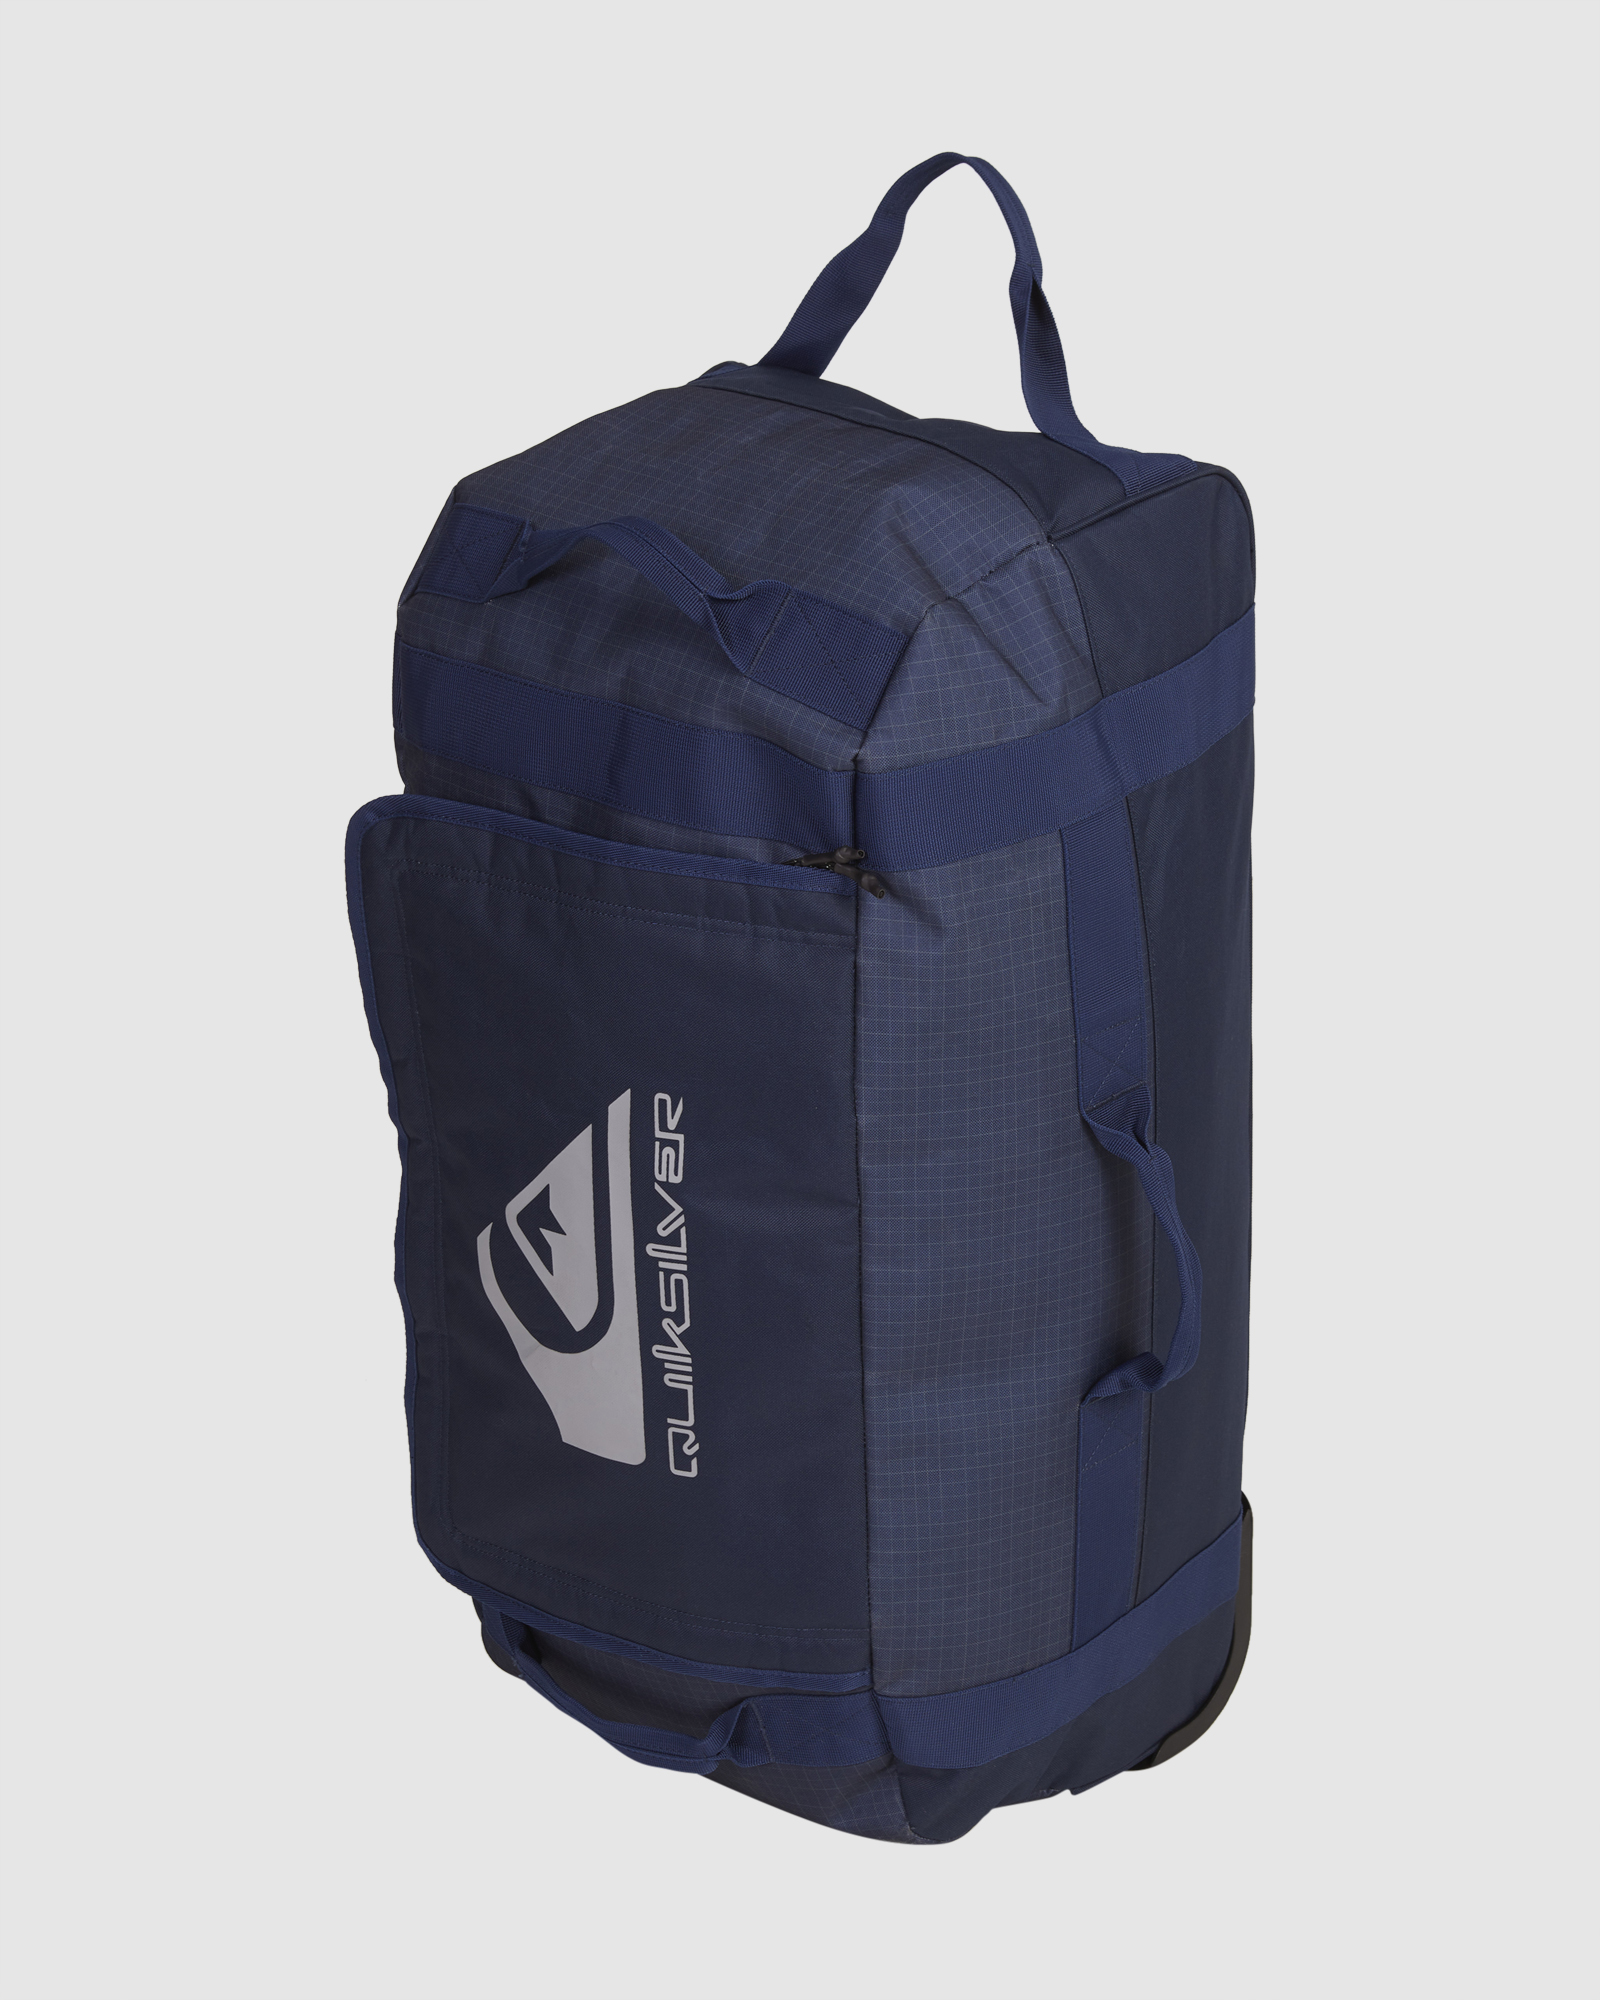 Quiksilver Shelter 70L Duffle Bag - Naval Academy | SurfStitch